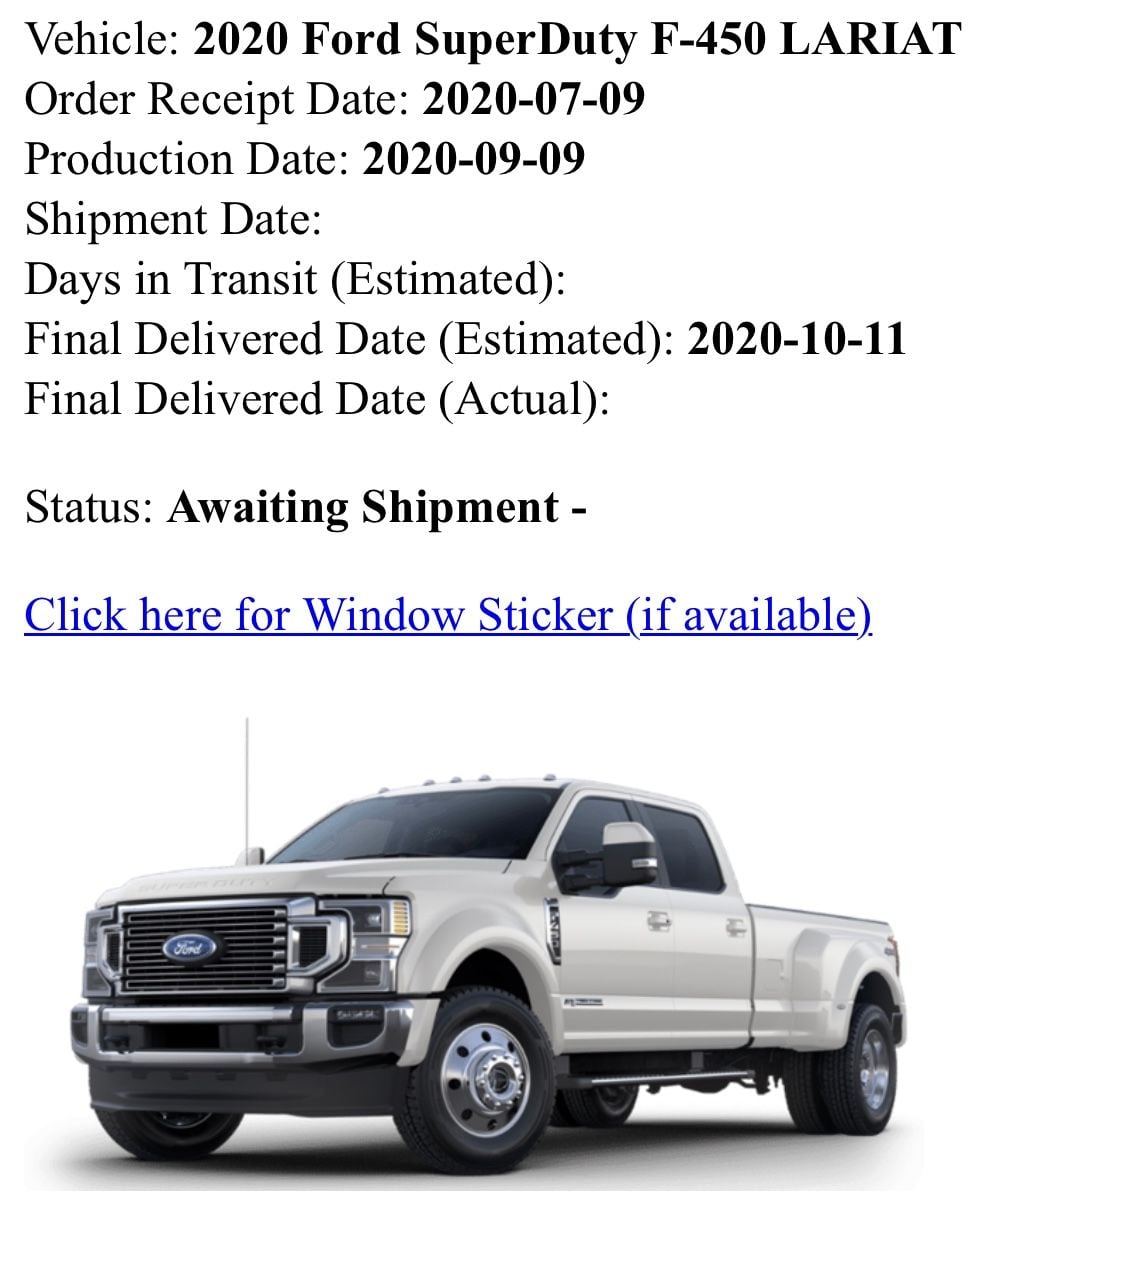 2020 Ford Super Duty Order Tracking. Please no off topic - Page 123